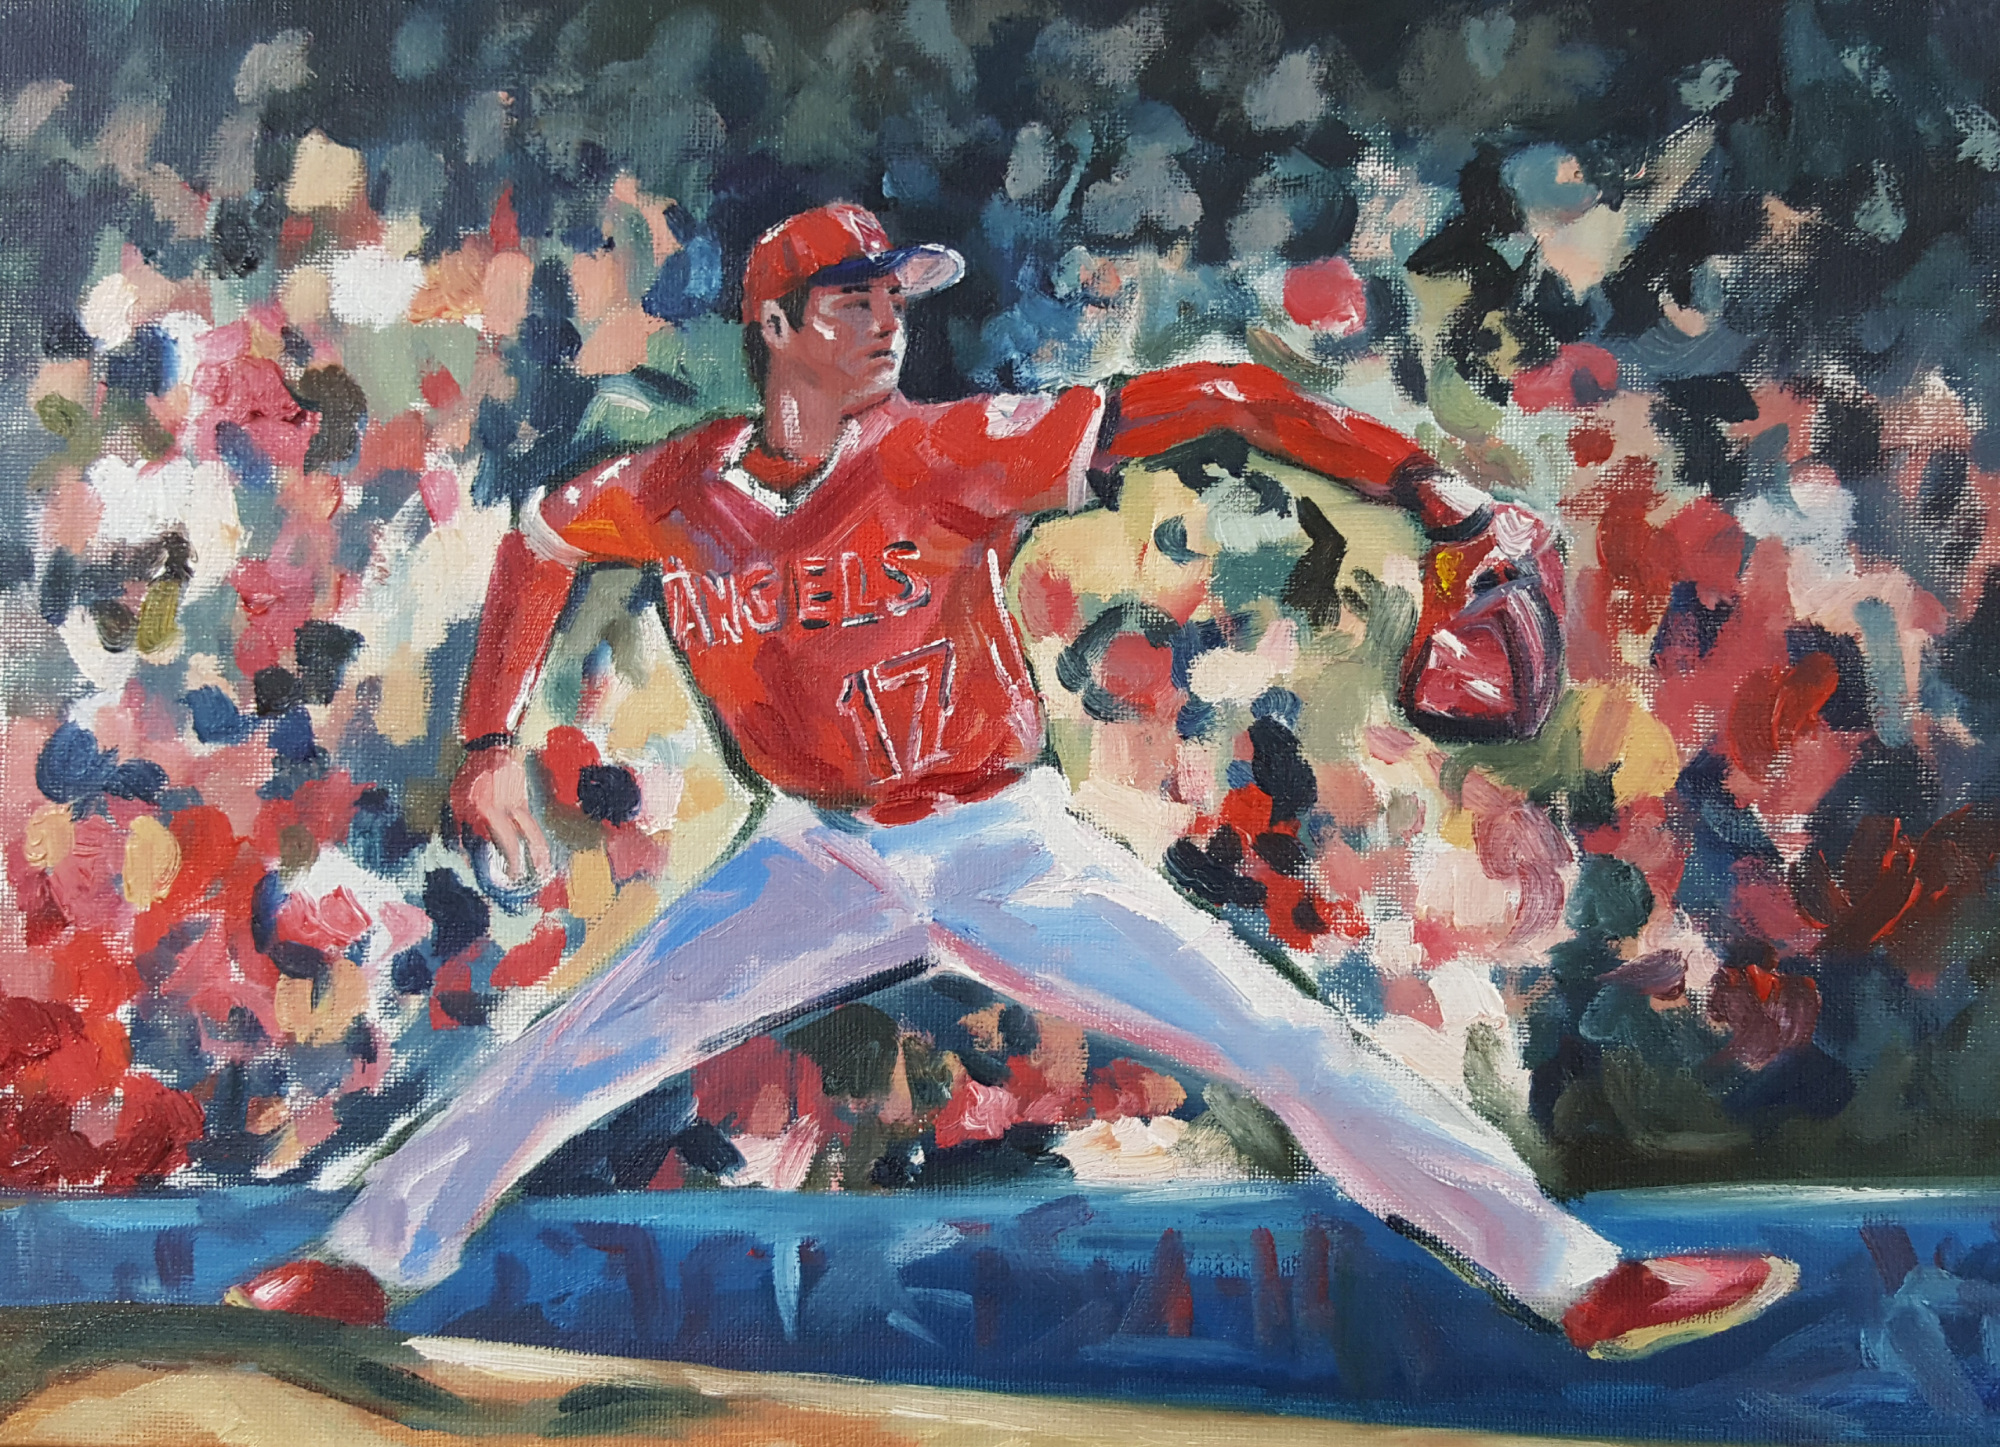 British artist Andy Brown captures essence of baseball through paintings | The Japan Times